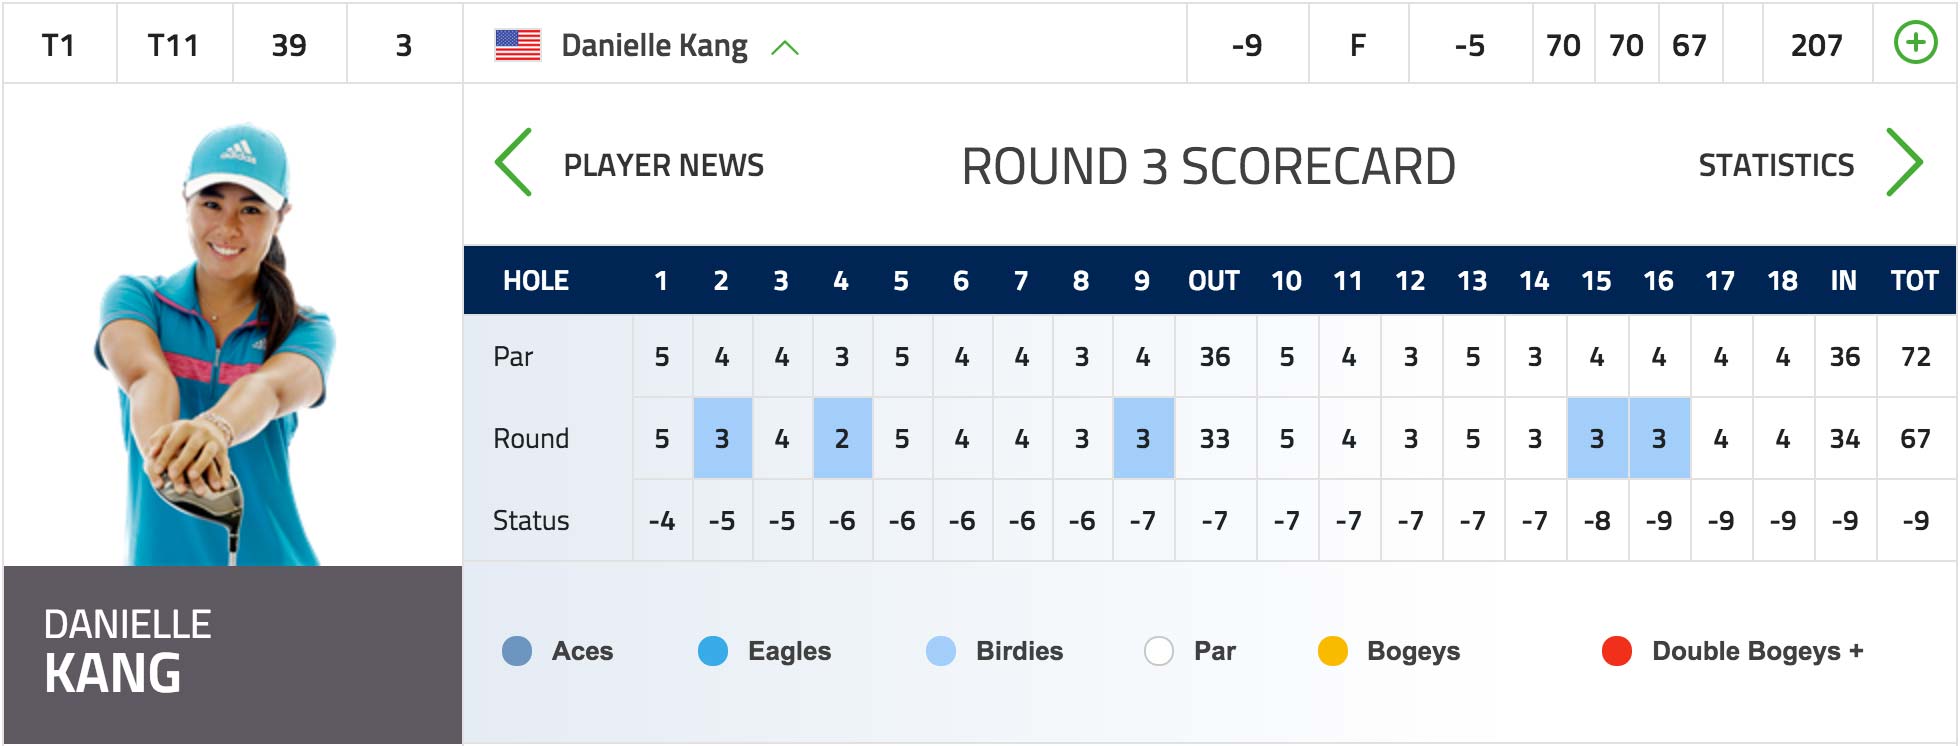 Danielle Kang is tied for the lead heading into the final round of the ISPS Handa Women's Australian Open